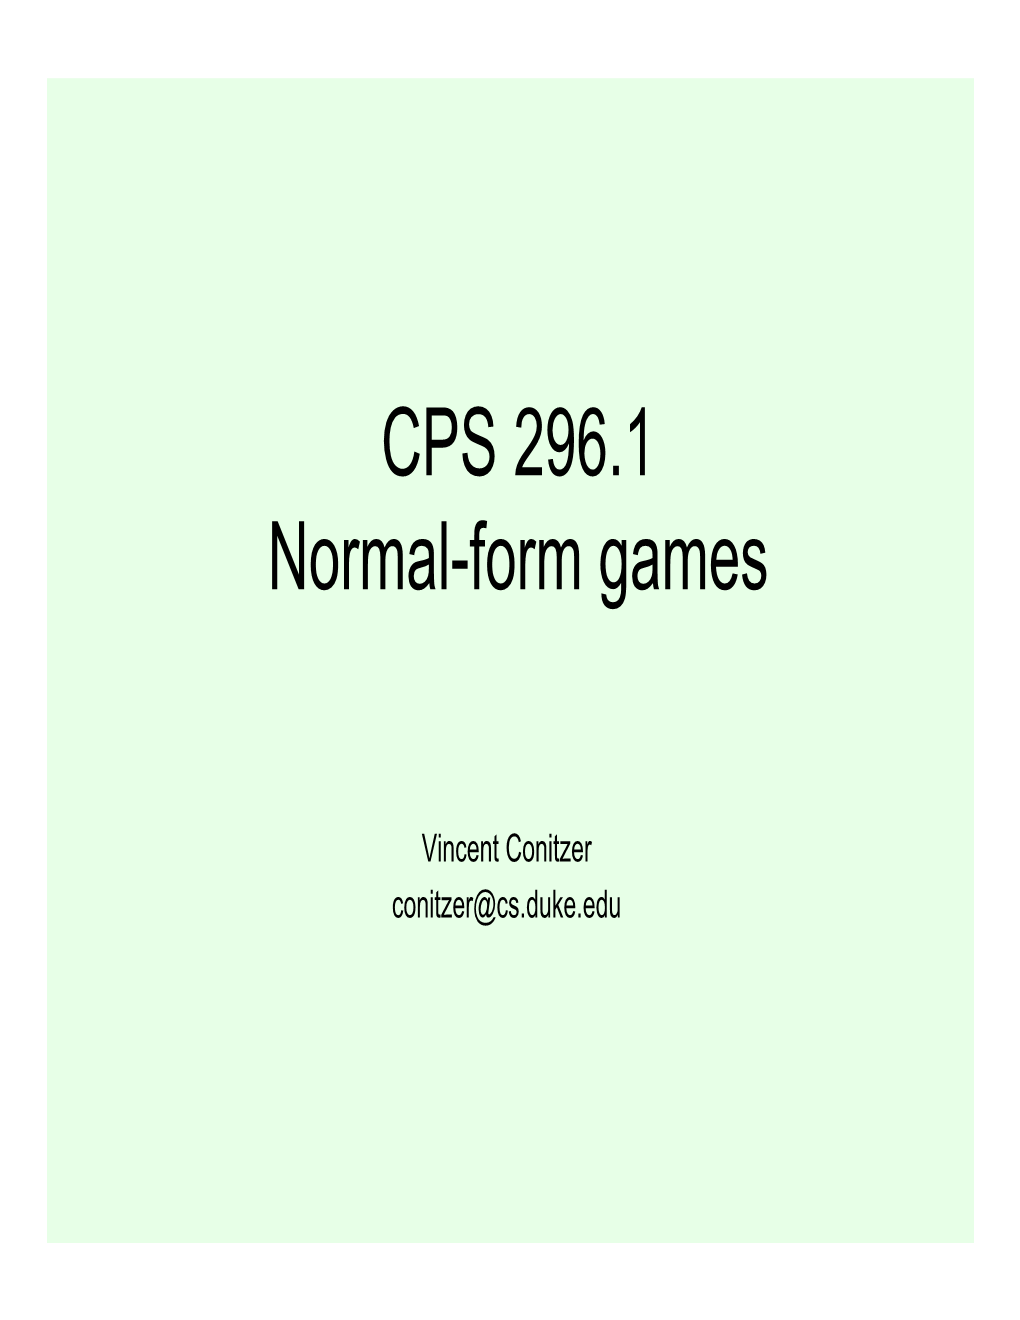 CPS 296.1 Normal-Form Games